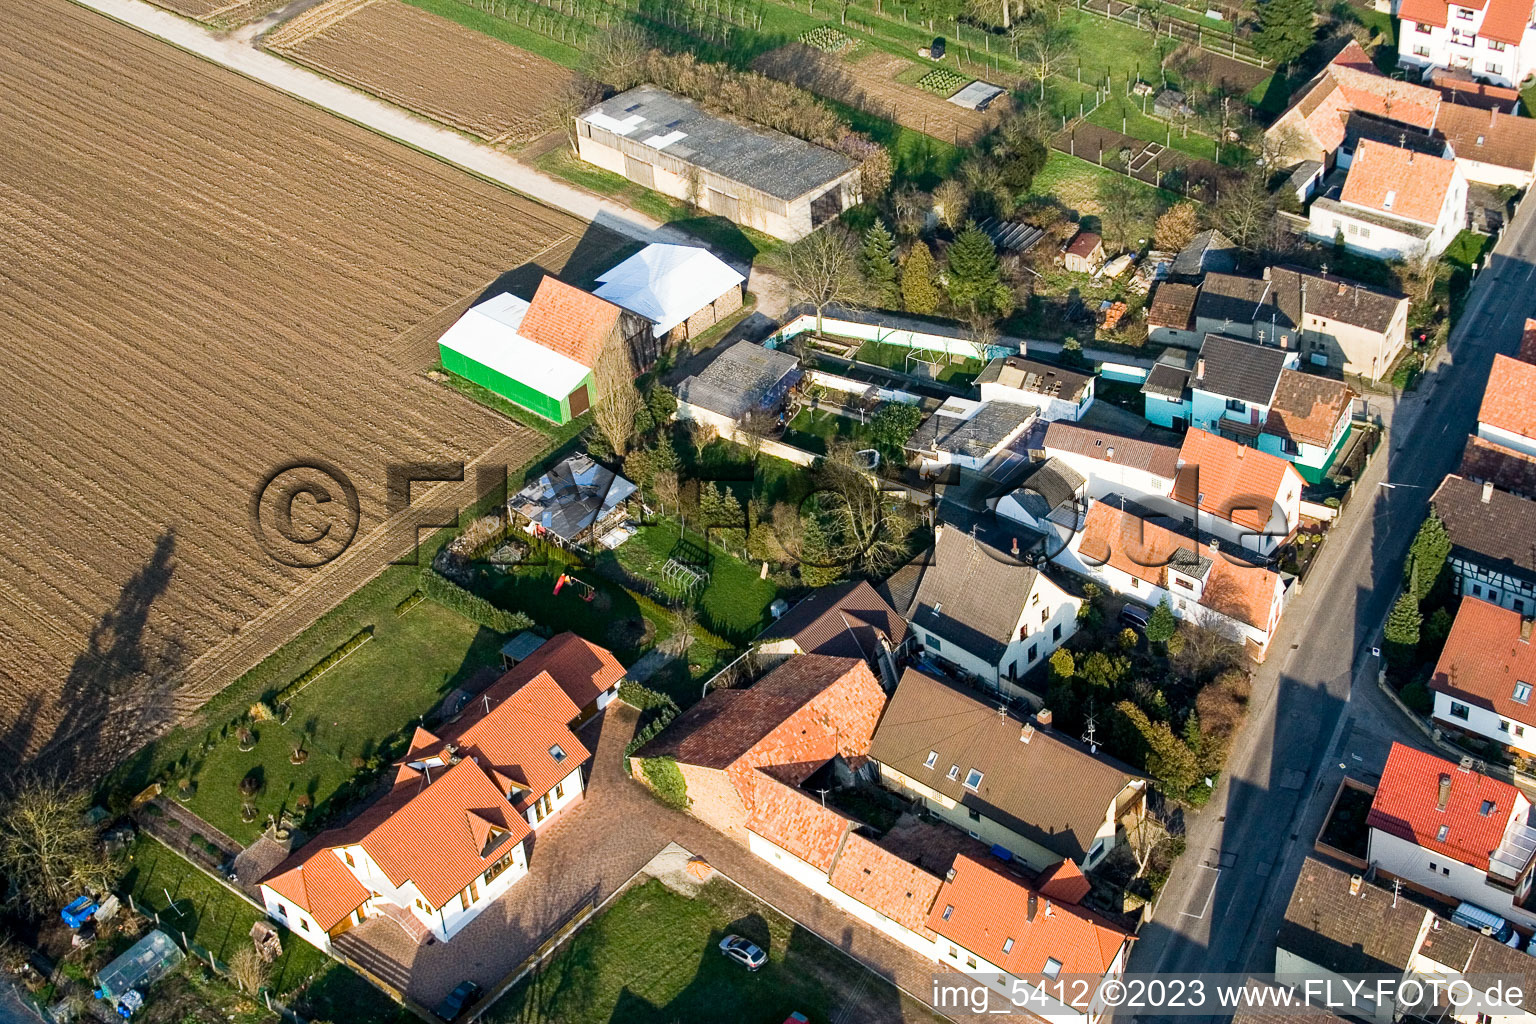 Saarstrasse NW in Kandel in the state Rhineland-Palatinate, Germany out of the air